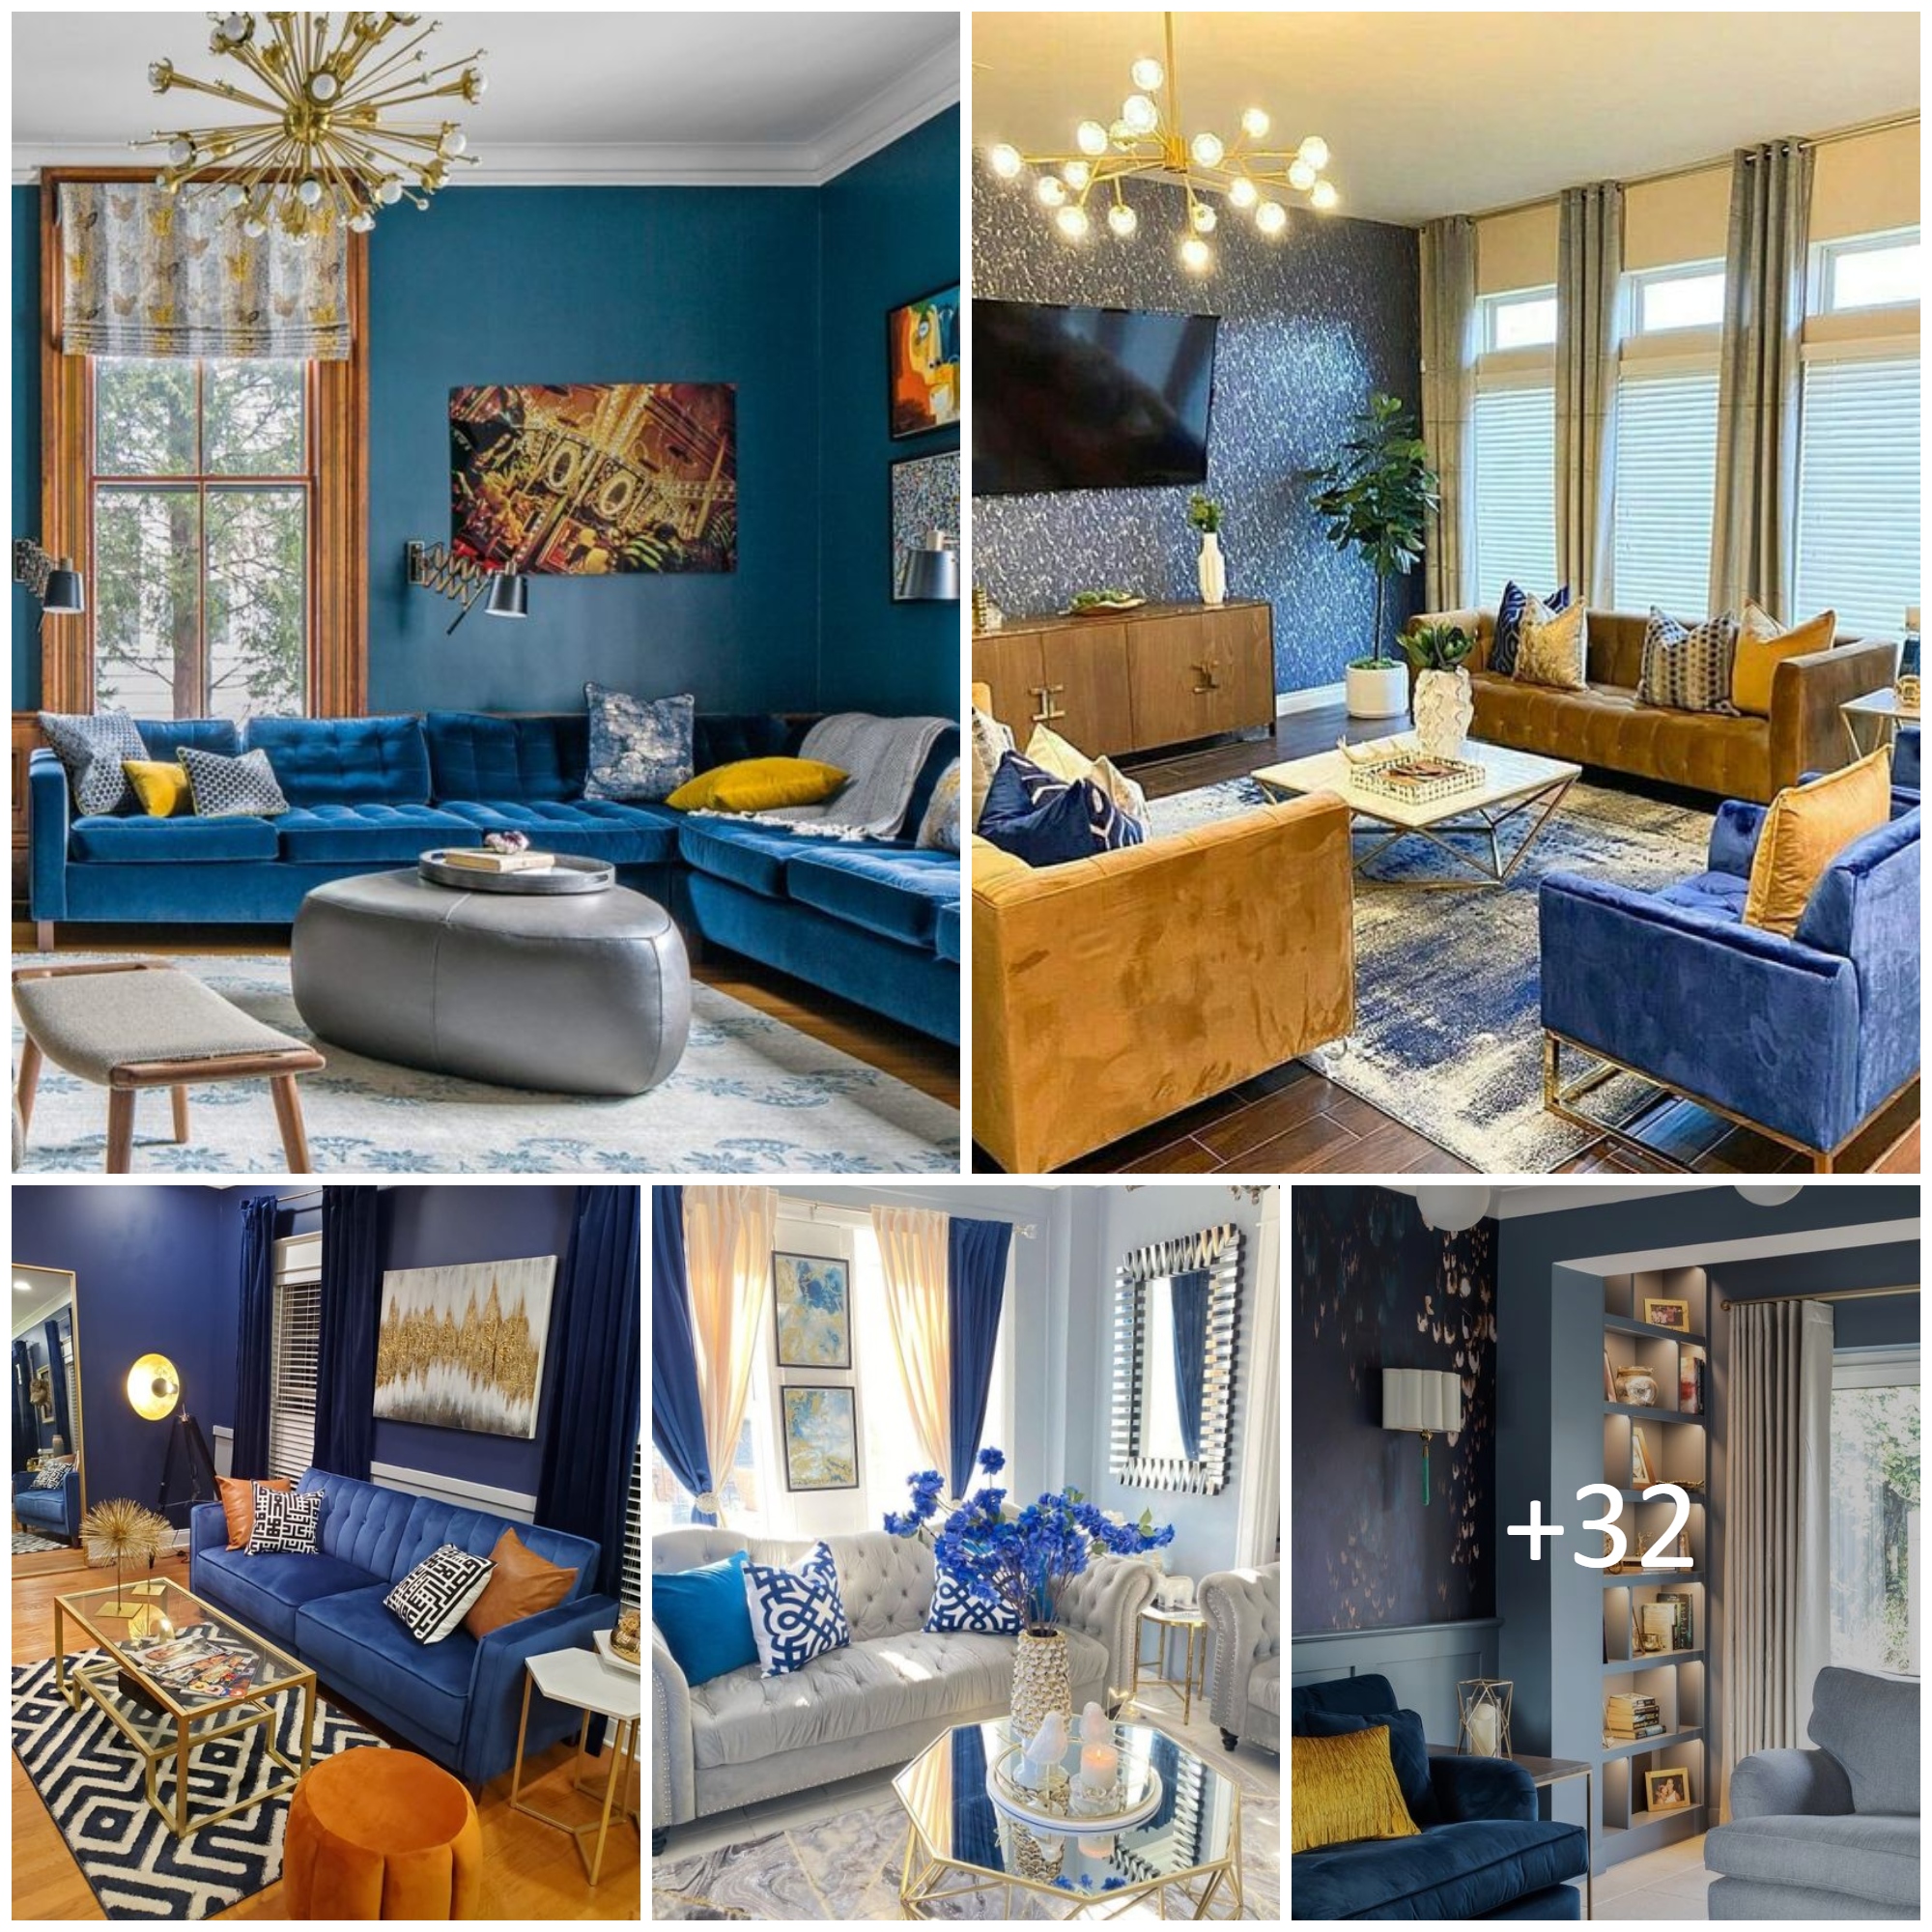 First Class Family Home With Blue And Gold Decor